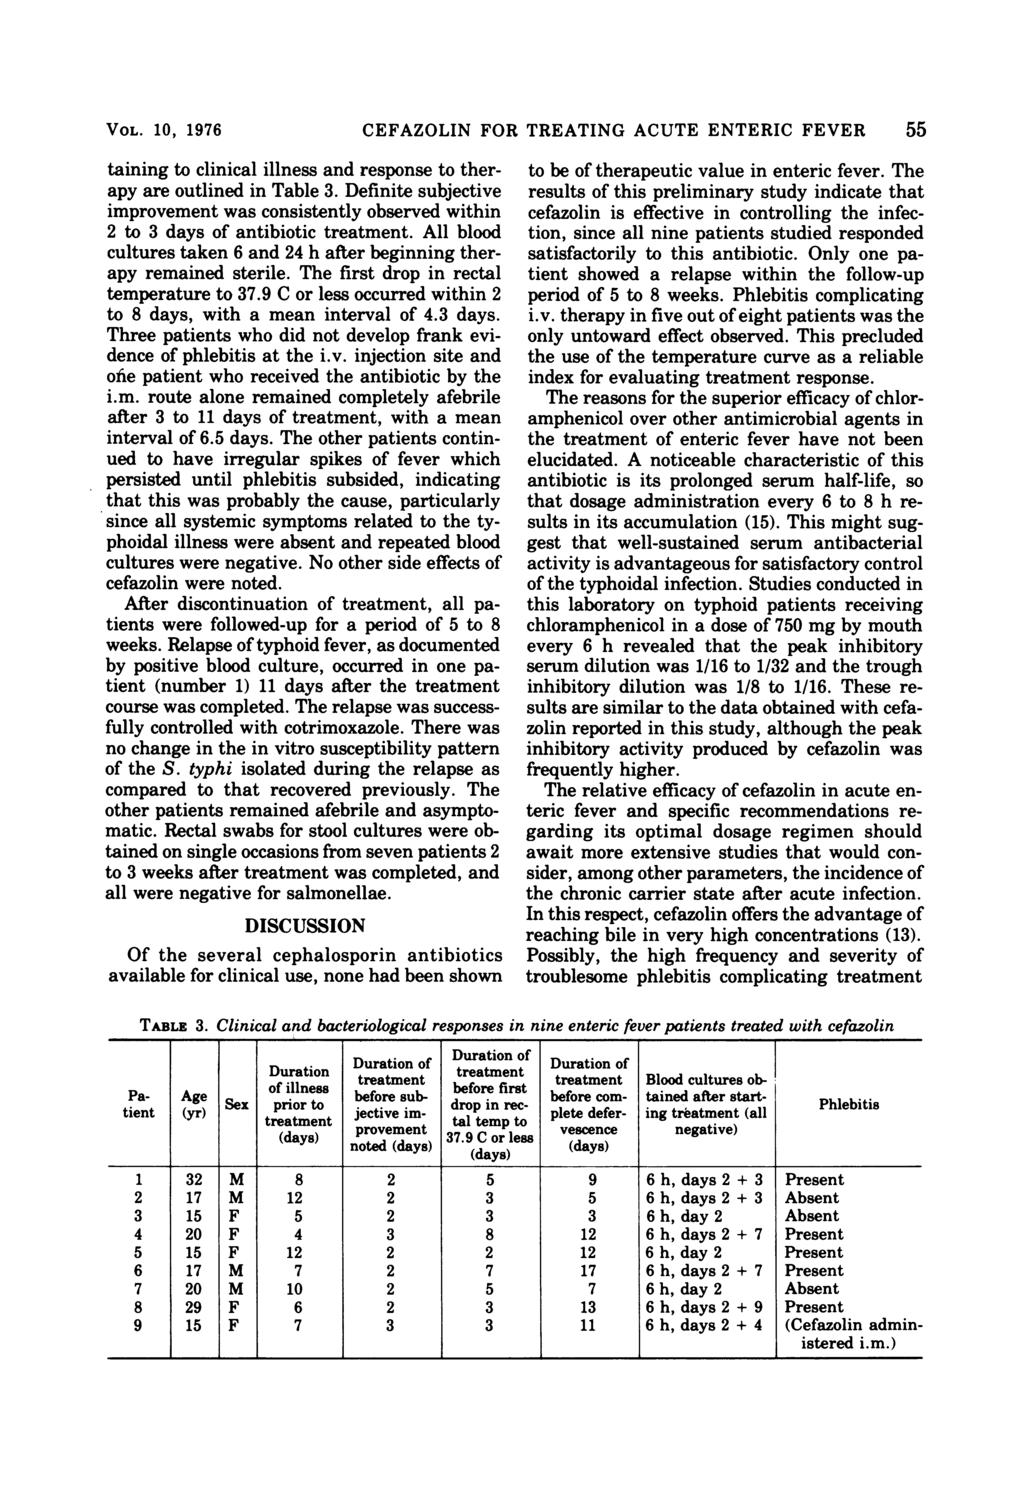 VOL. 10, 1976 taining to clinical illness and response to therapy are outlined in Table 3. Definite subjective improvement was consistently observed within 2 to 3 days of antibiotic treatment.